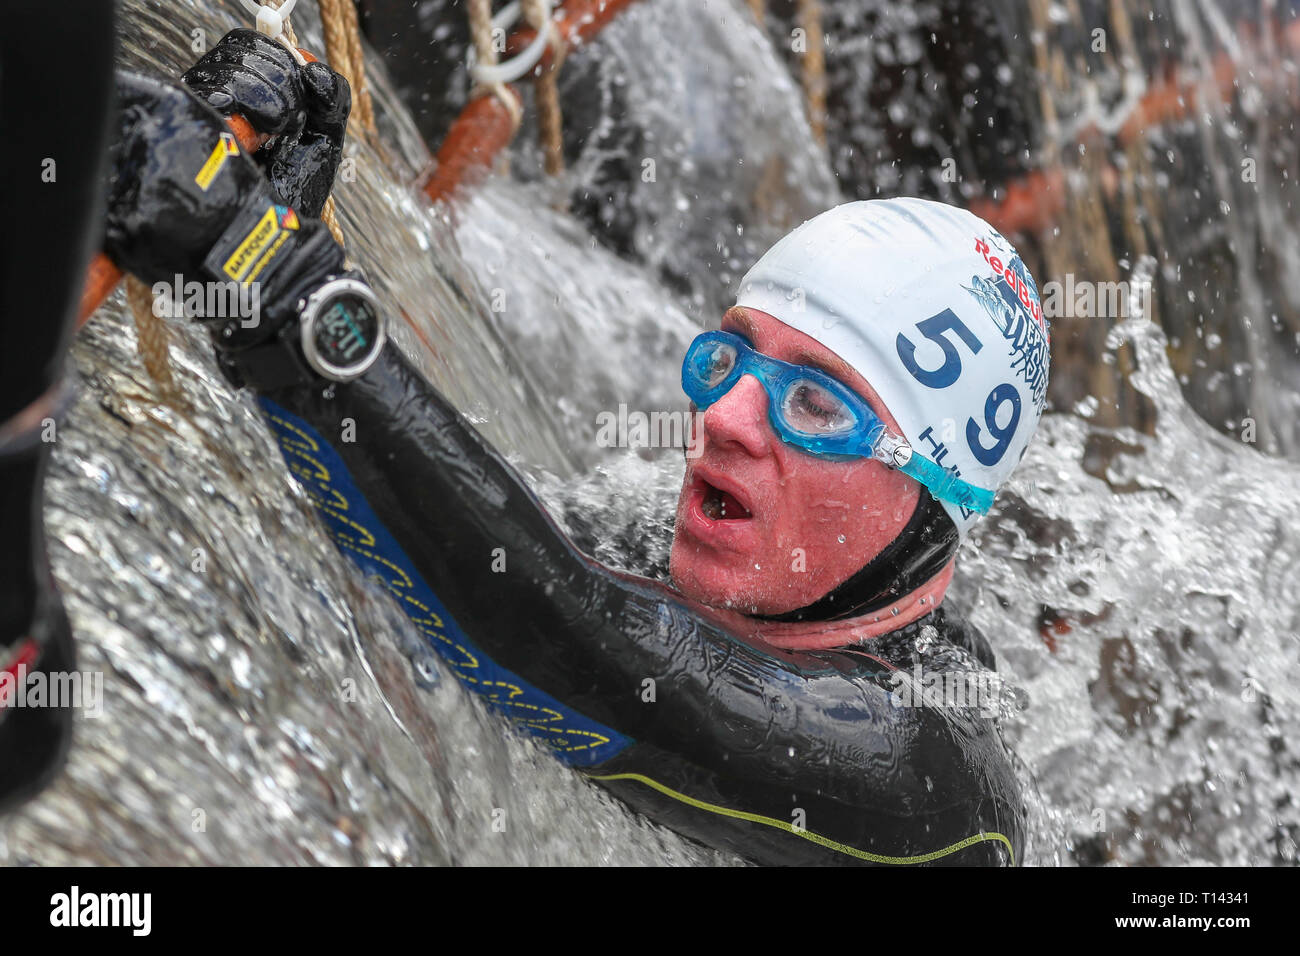 Glasgow, Scotland, UK. 23rd March, 2019. 600 hundred international competitors took part in the annual Red Bull Neptune Steps Cold Water race along 5 locks of the Clyde and Forth Canal at Maryhill, known as Neptune Steps, Glasgow, UK. Thee competitors had to swim the canal, climb ropes and specially constructed obstacle walls to complete the course in water temperatures of up to 8 degrees centigrade. Credit: Findlay/Alamy Live News Stock Photo